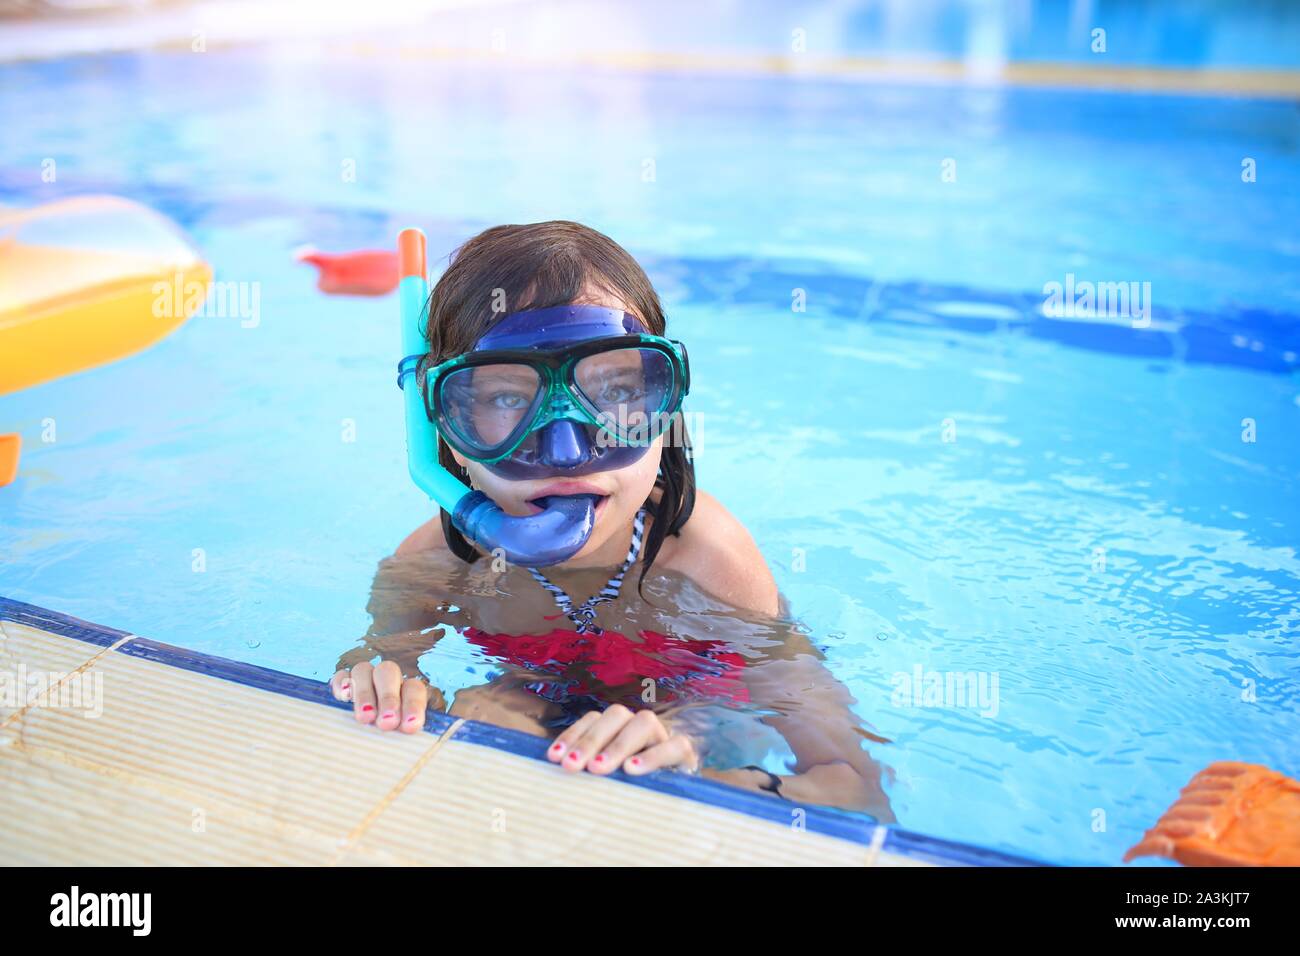 Joyful and smiling young girl in a diving mask in the pool Stock Photo